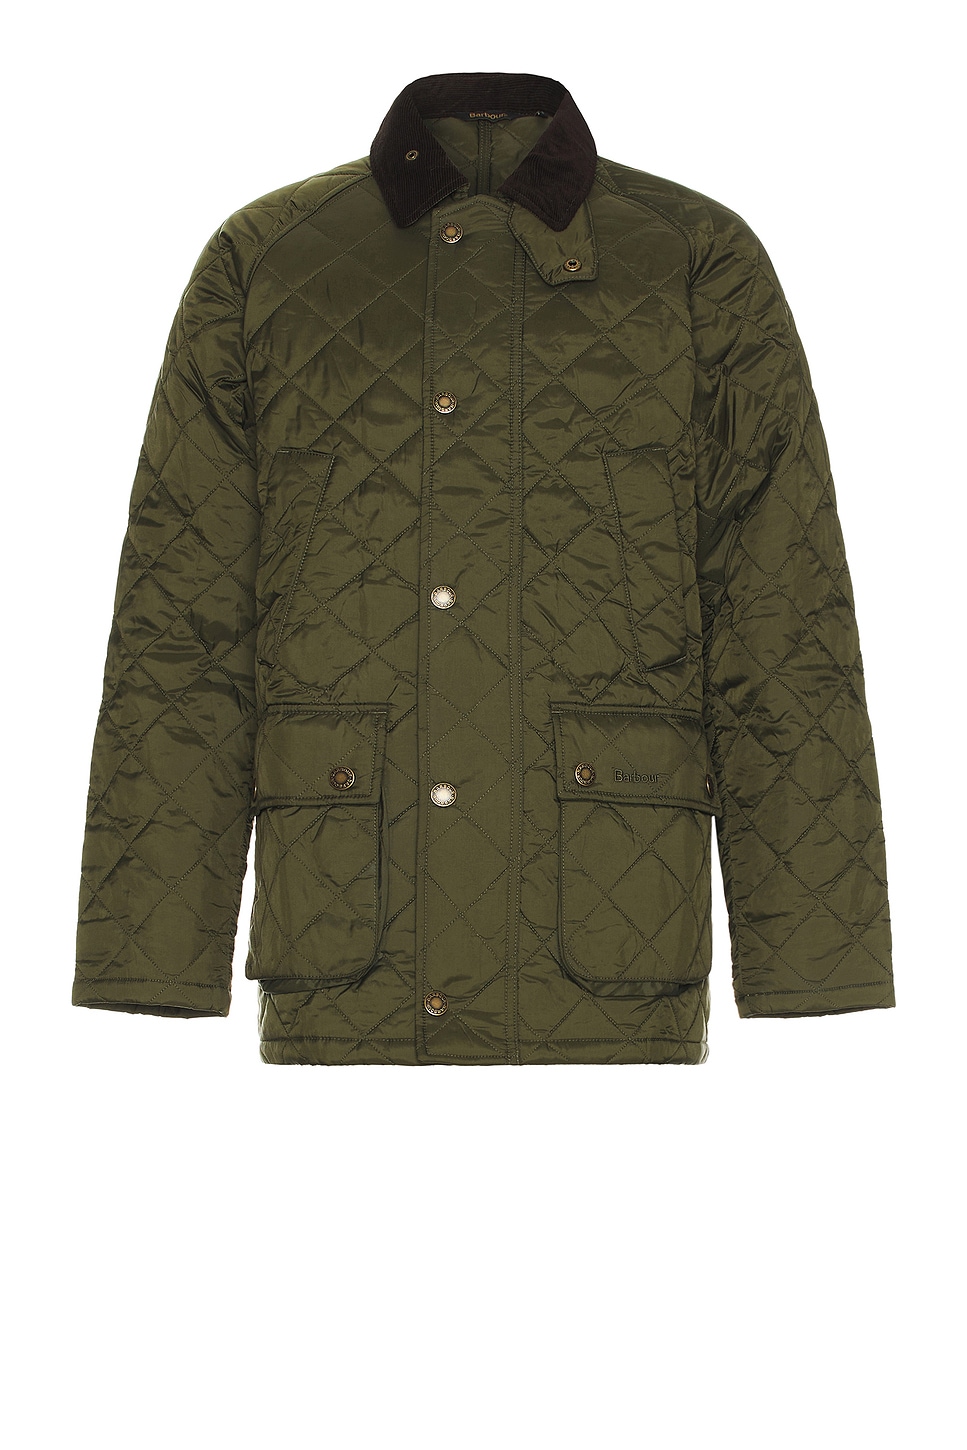 Image 1 of Barbour Ashby Quilt Jacket in Olive